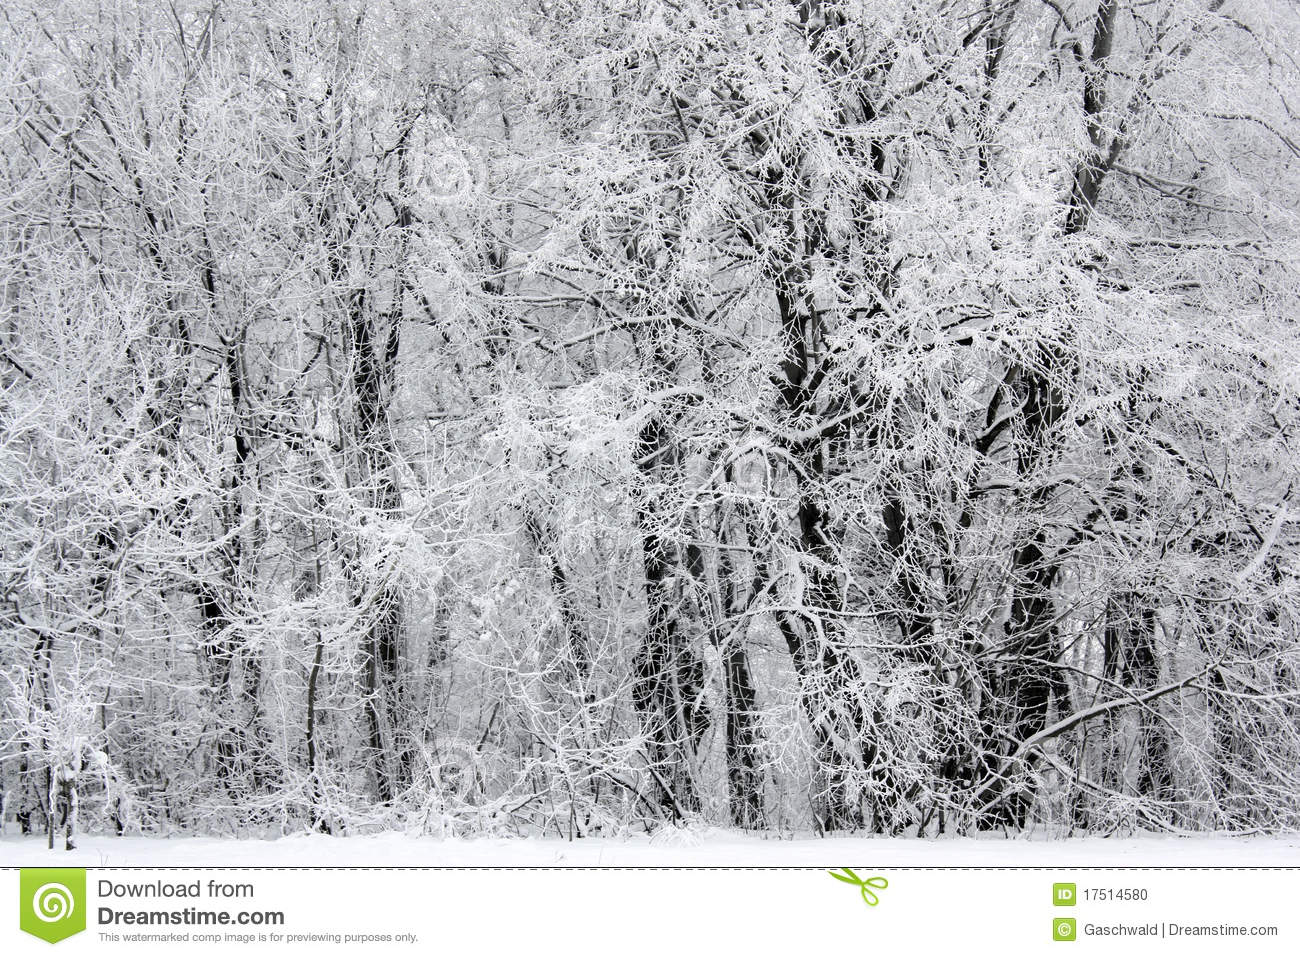 More Similar Stock Images Of   Snowy Winter Forest Scene